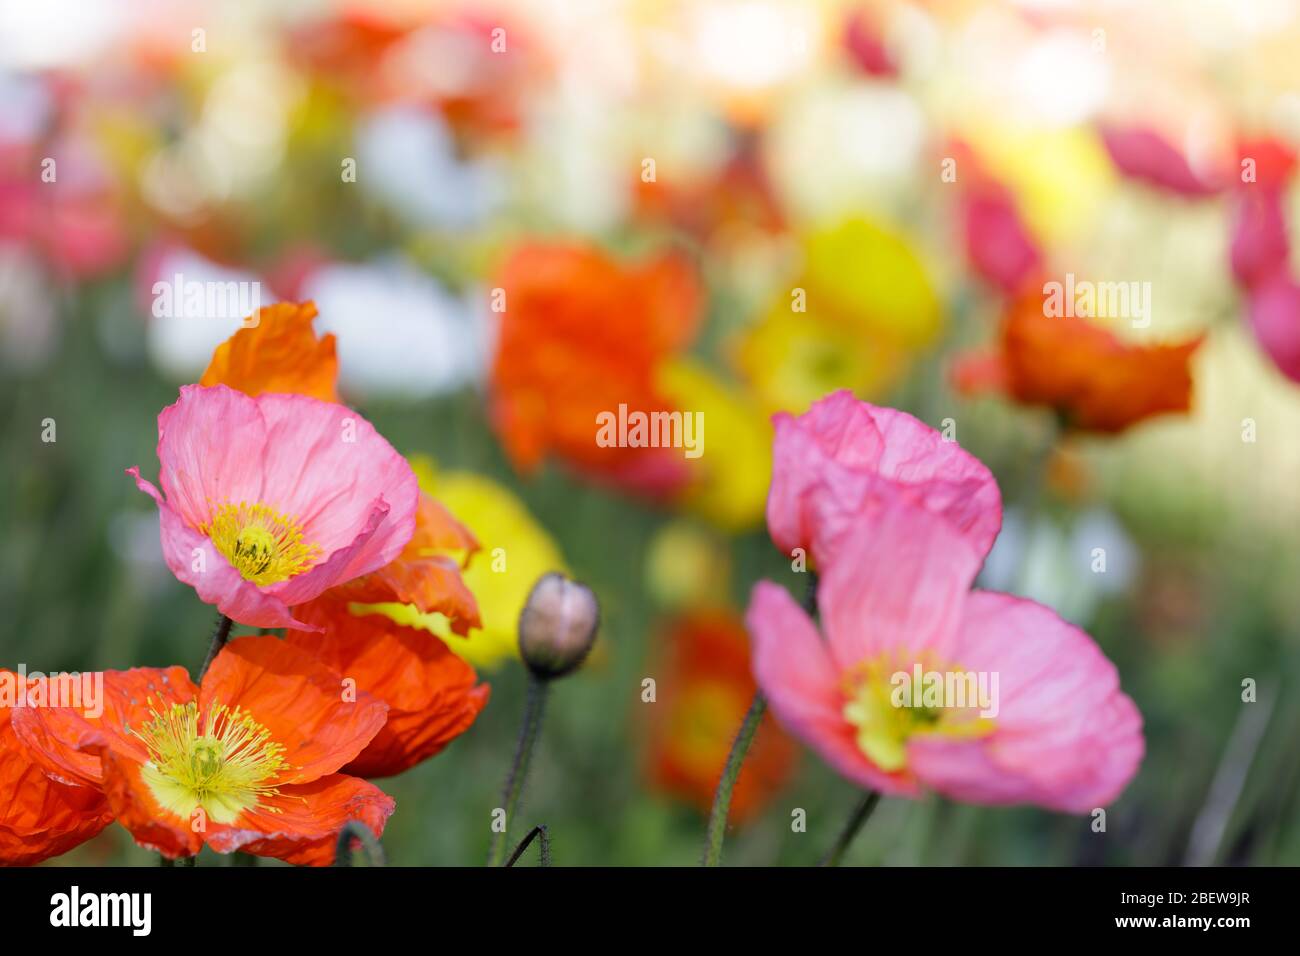 Iceland Poppies in Bloom Stock Photo